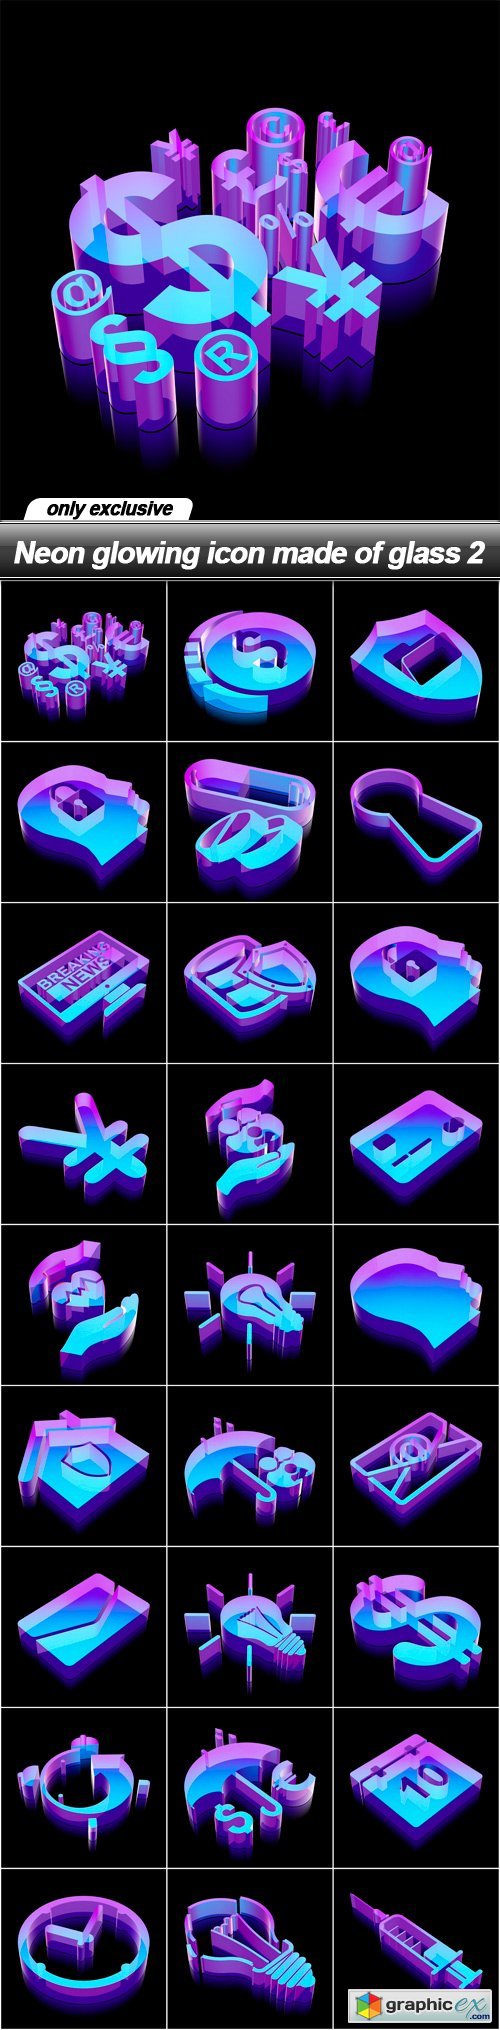 Neon glowing icon made of glass 2 - 51 EPS